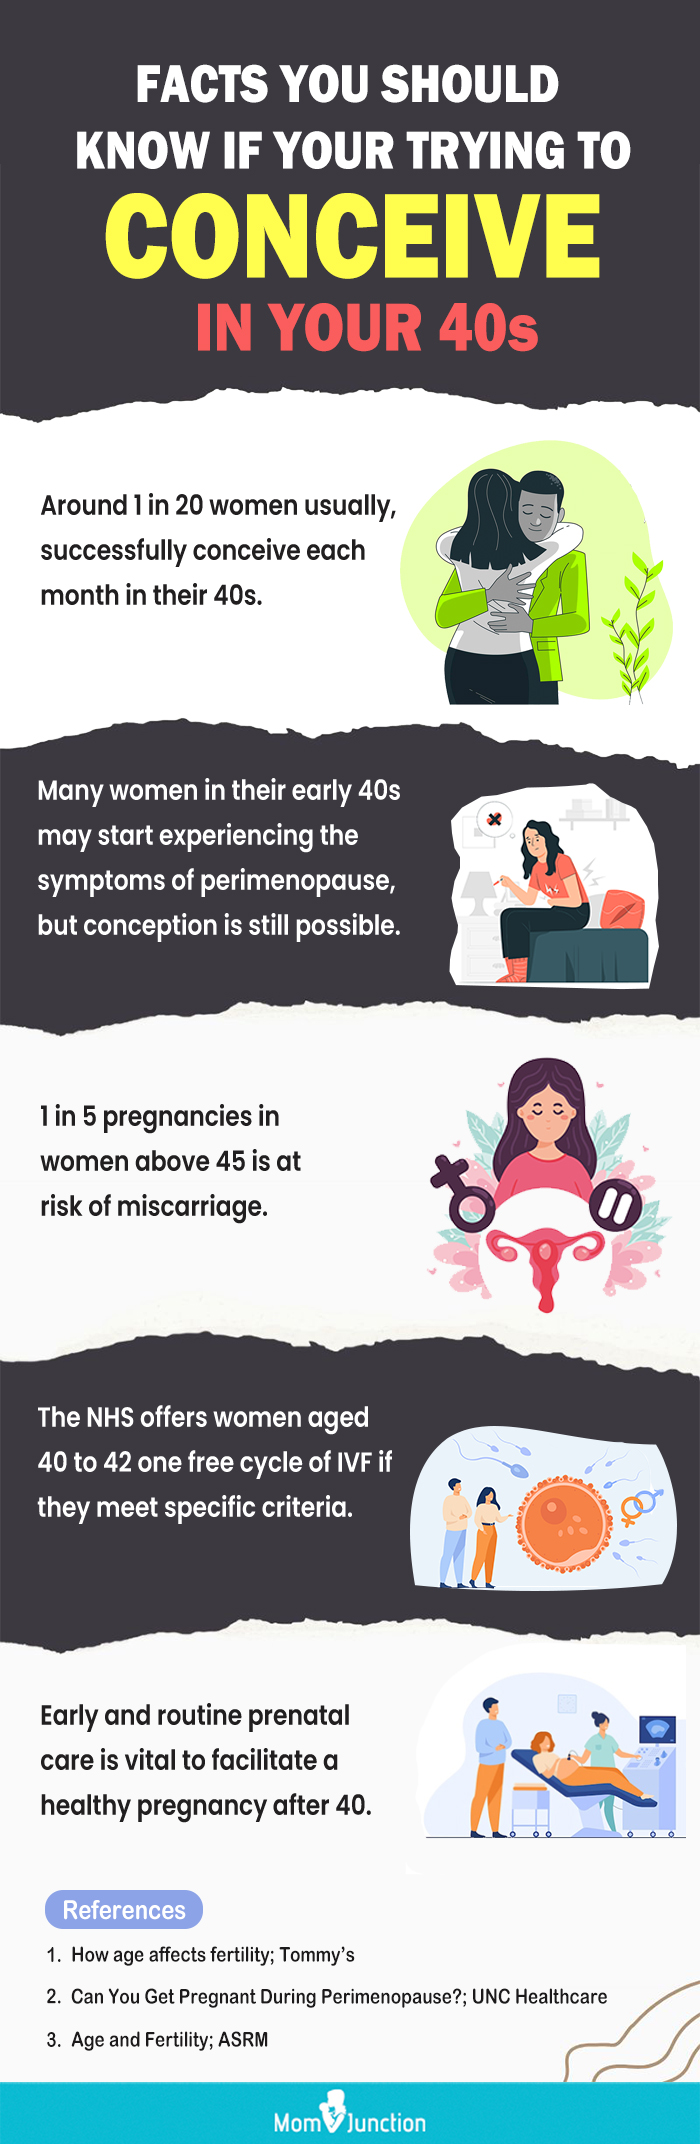 https://www.momjunction.com/wp-content/uploads/2015/10/Facts-You-Should-Know-If-You-Are-Trying-To-Conceive-In-Your-40s.jpg